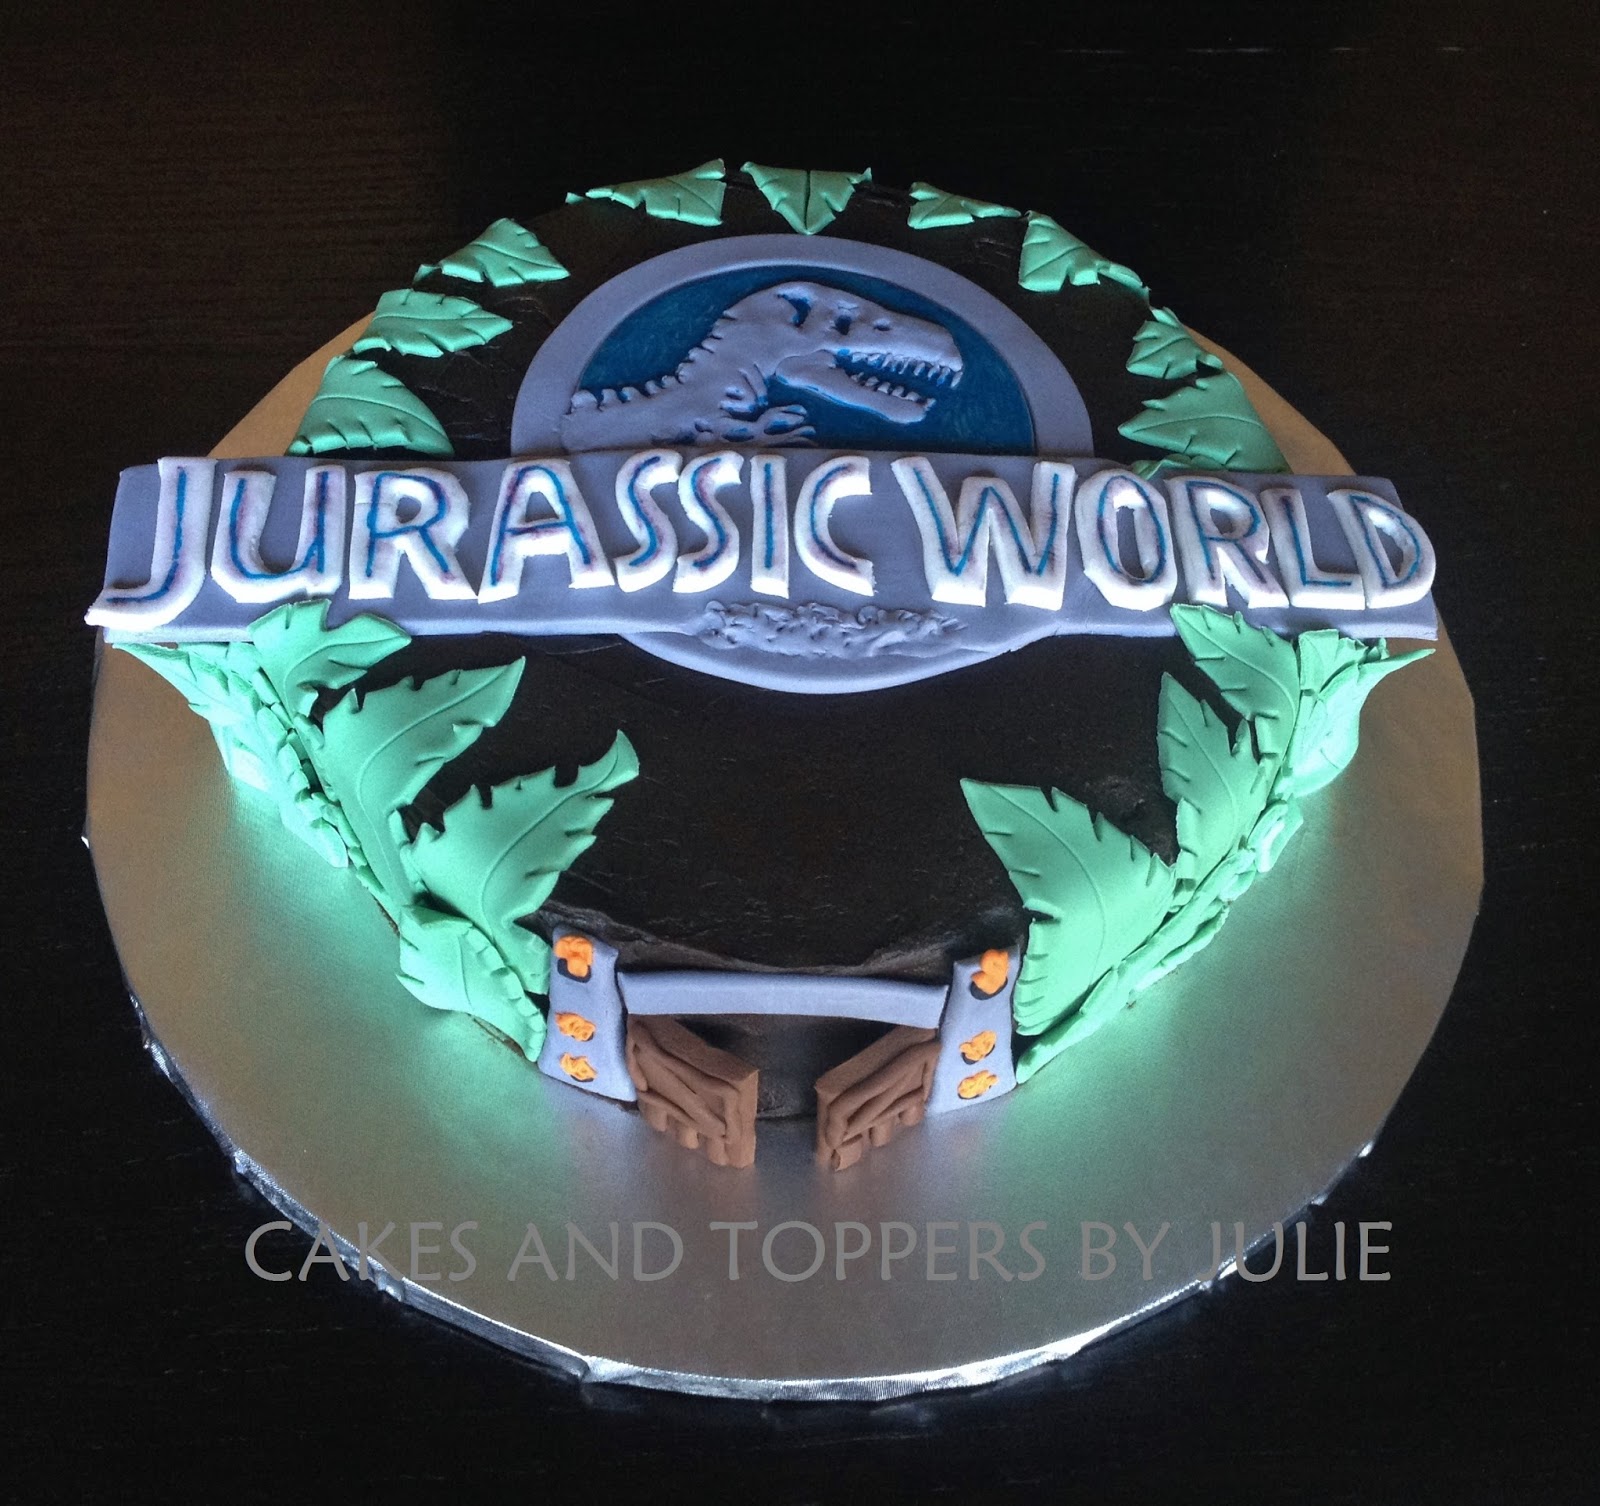 Custom Cakes by Julie: Jurassic World Cake and Toppers1600 x 1506